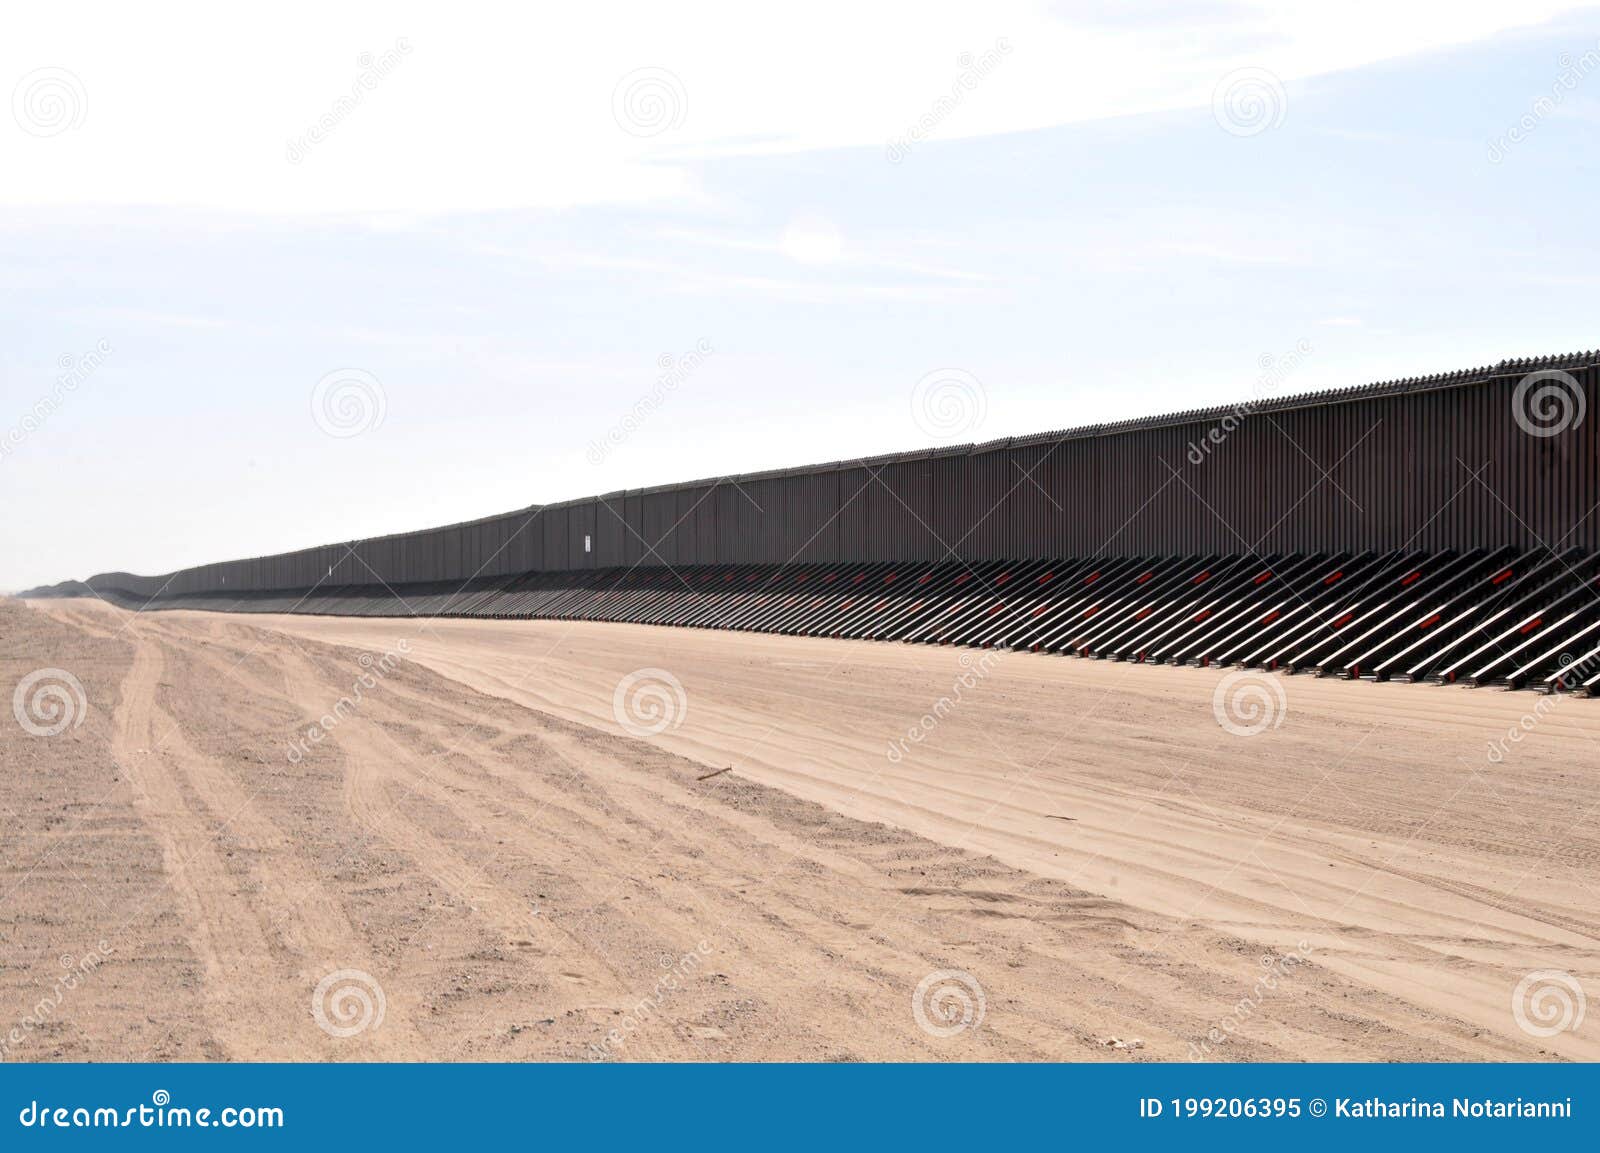 border wall between united states and mexico